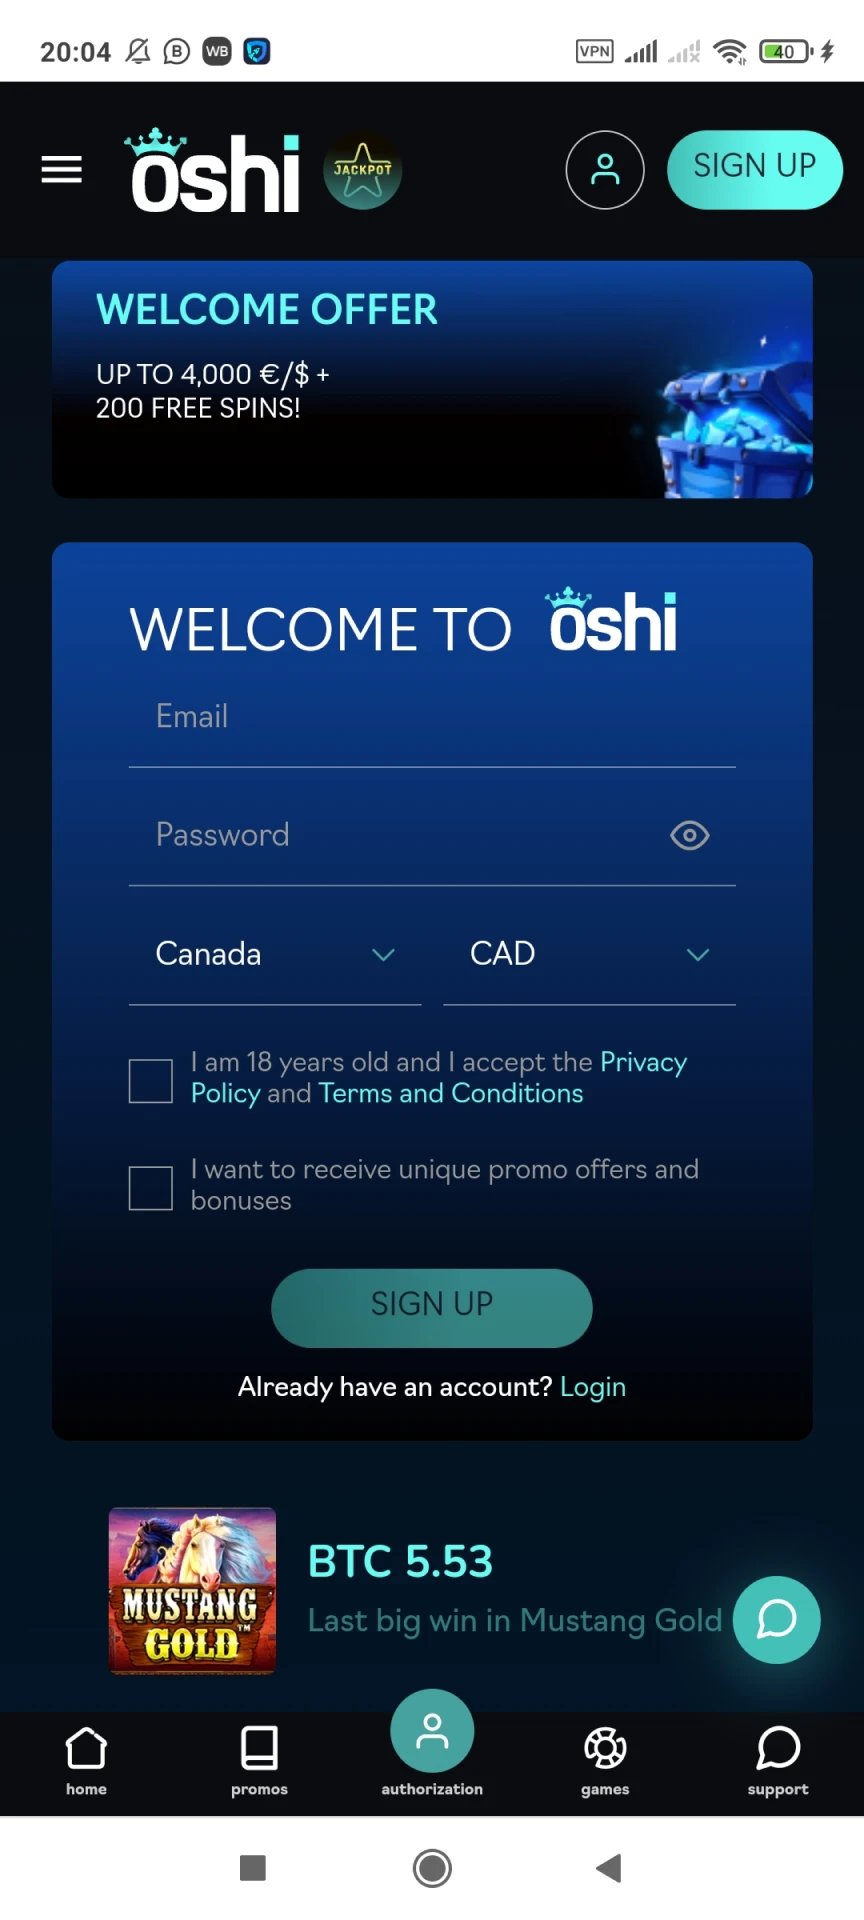 Visit the Oshi Casino app registration page.